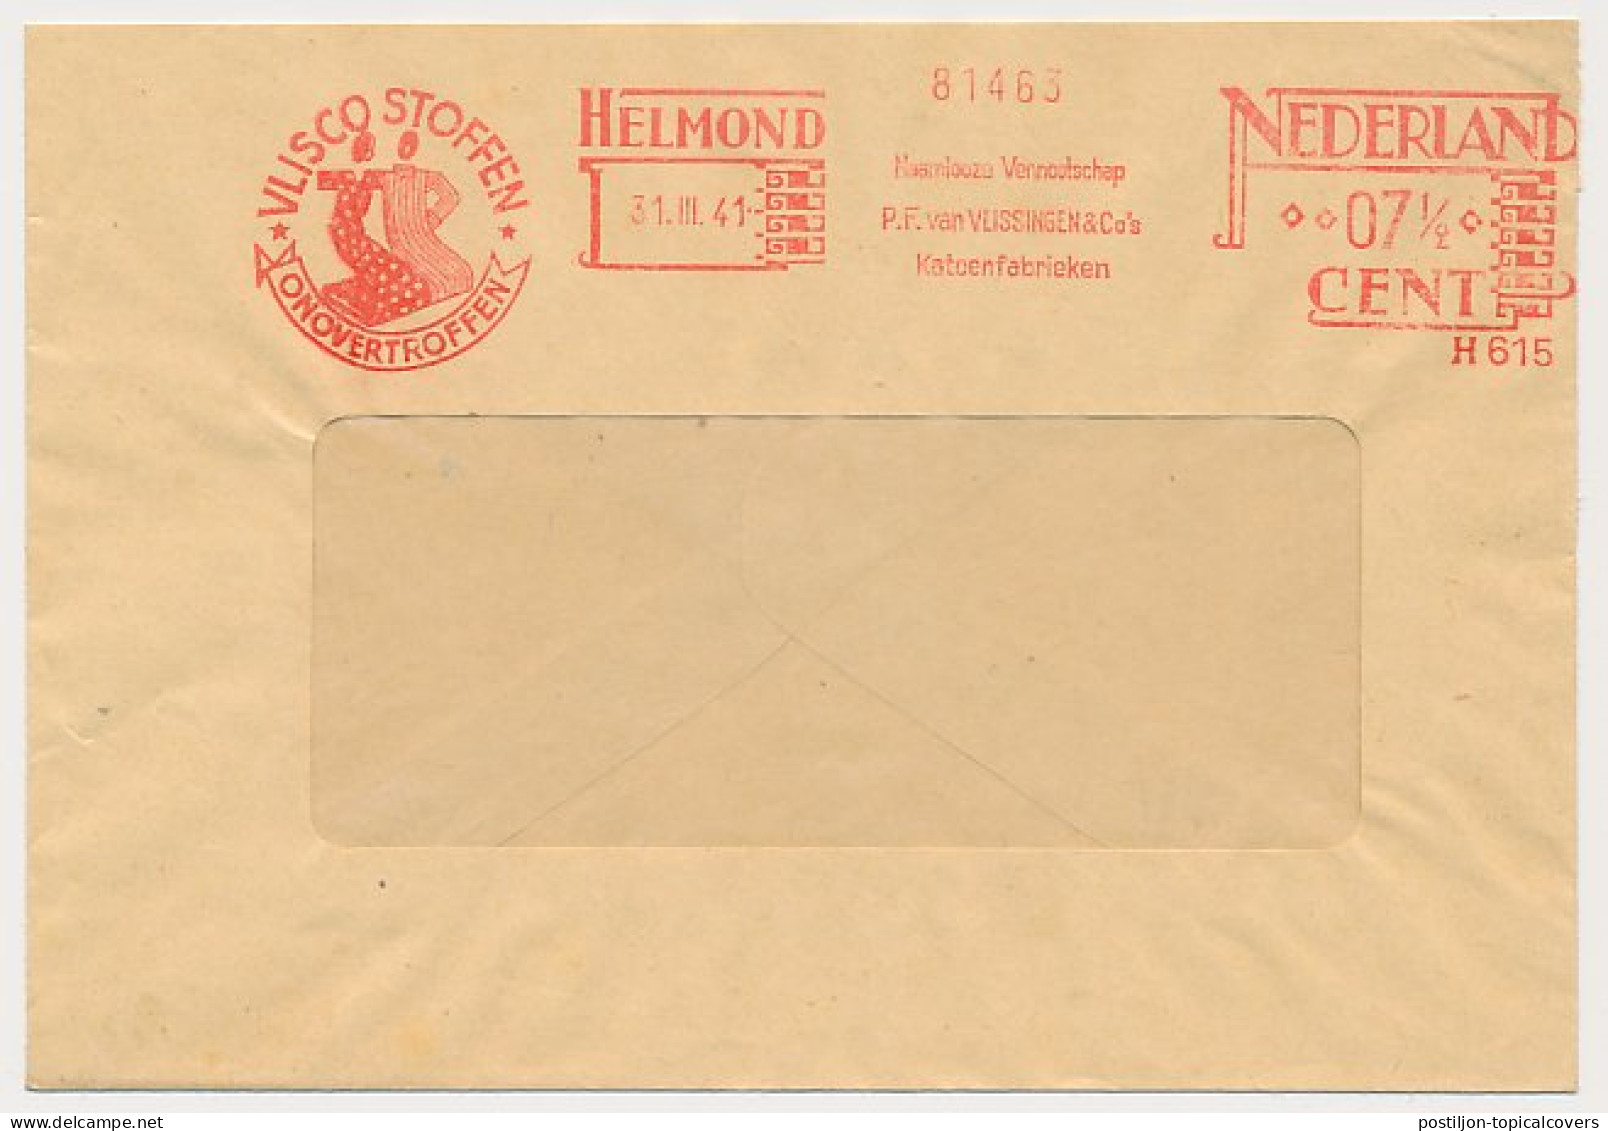 Meter Cover Netherlands 1941 Cotton Factory - Clothing Fabrics - Helmond - Textil